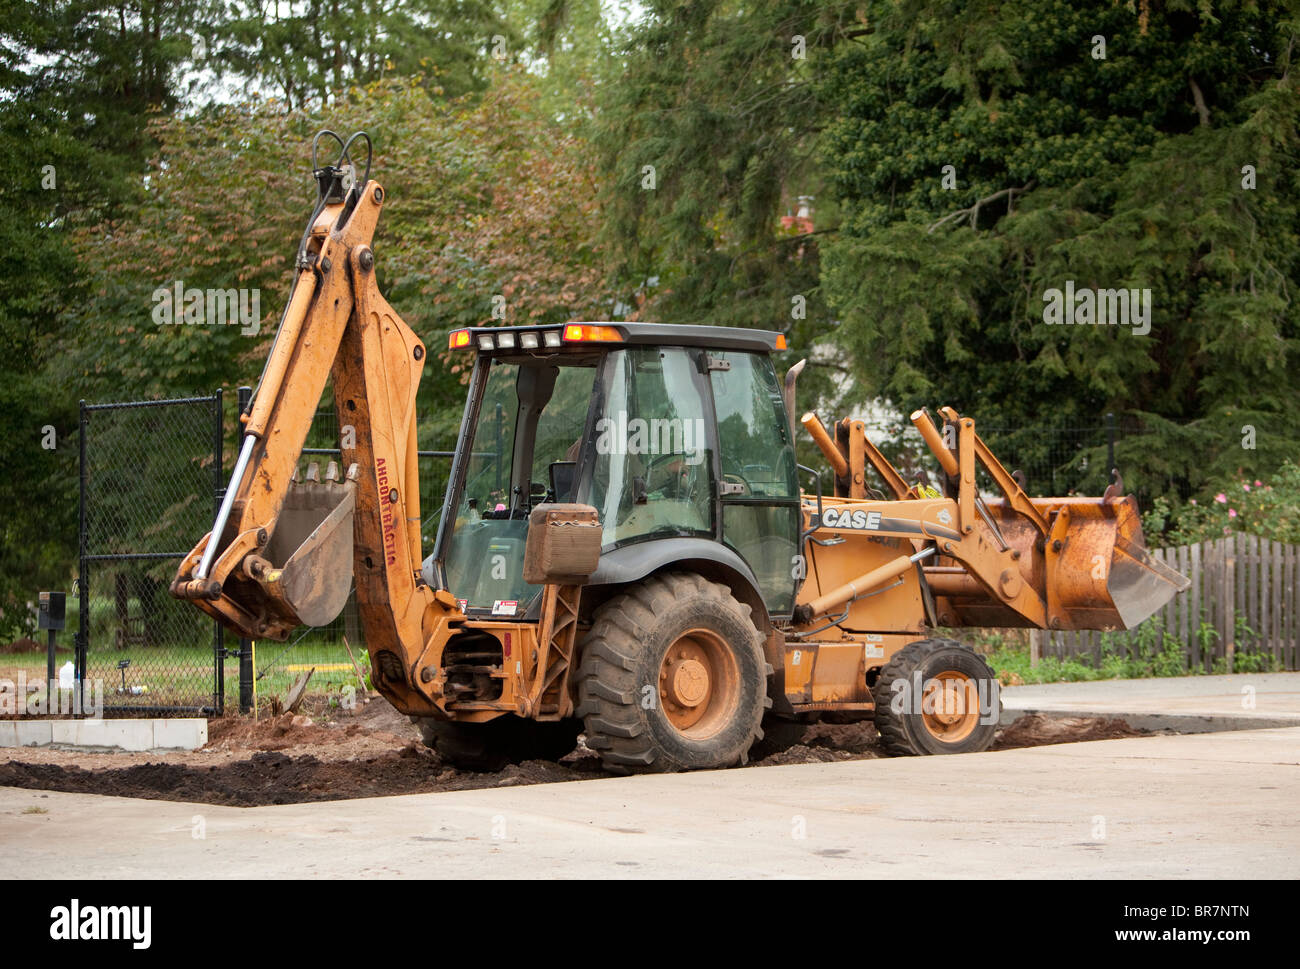 A yellow Case tractor with a backhoe and front loader in a pit. Stock Photo